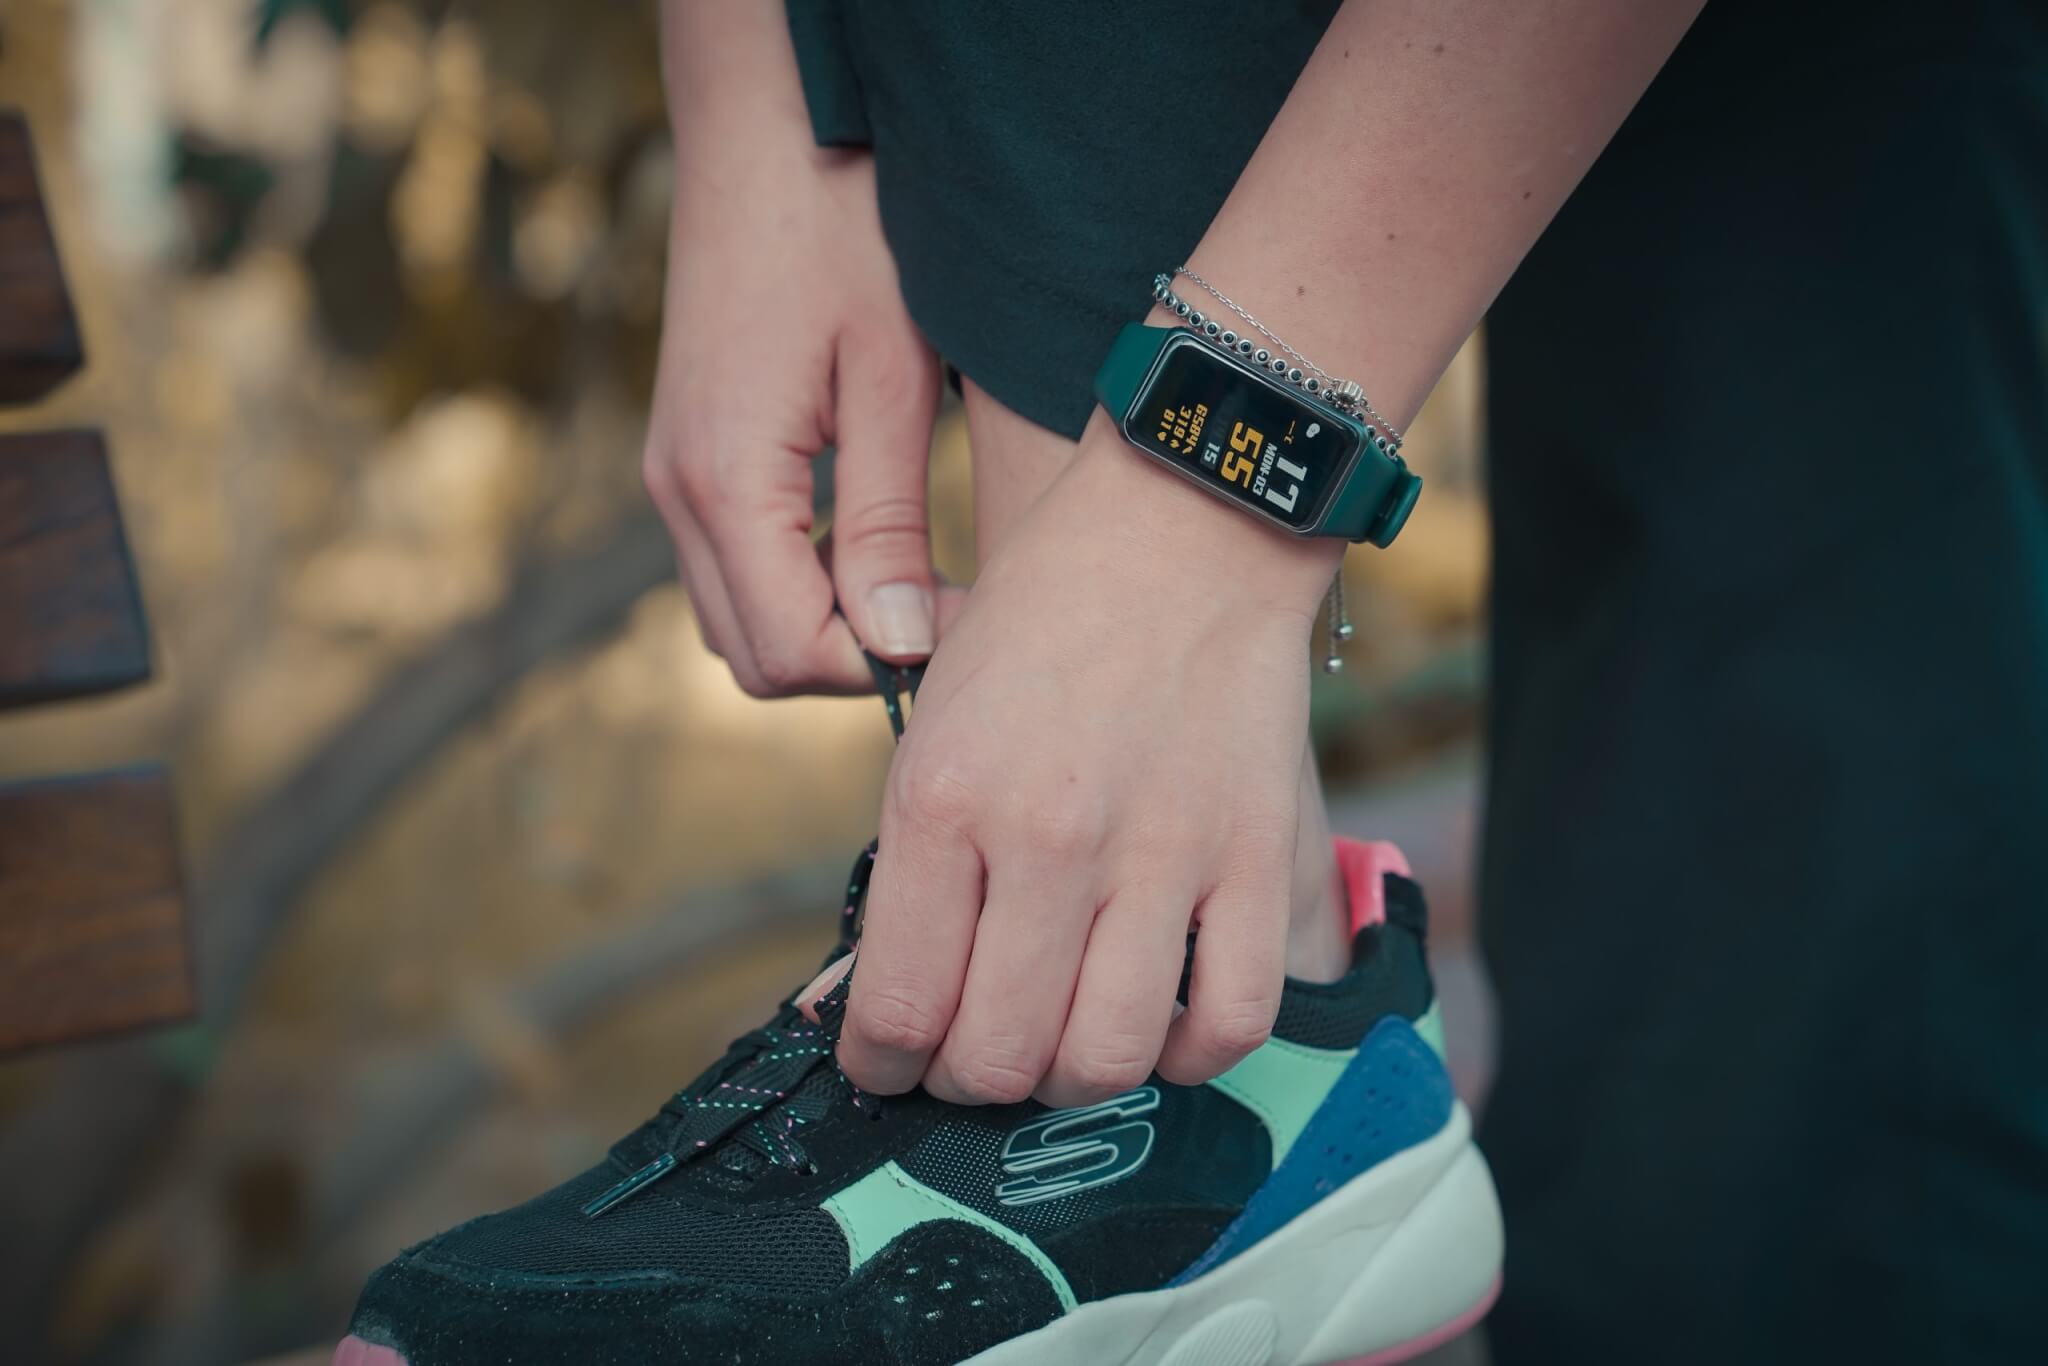 Runner lacing sneakers, wearing fitness tracker before exercising